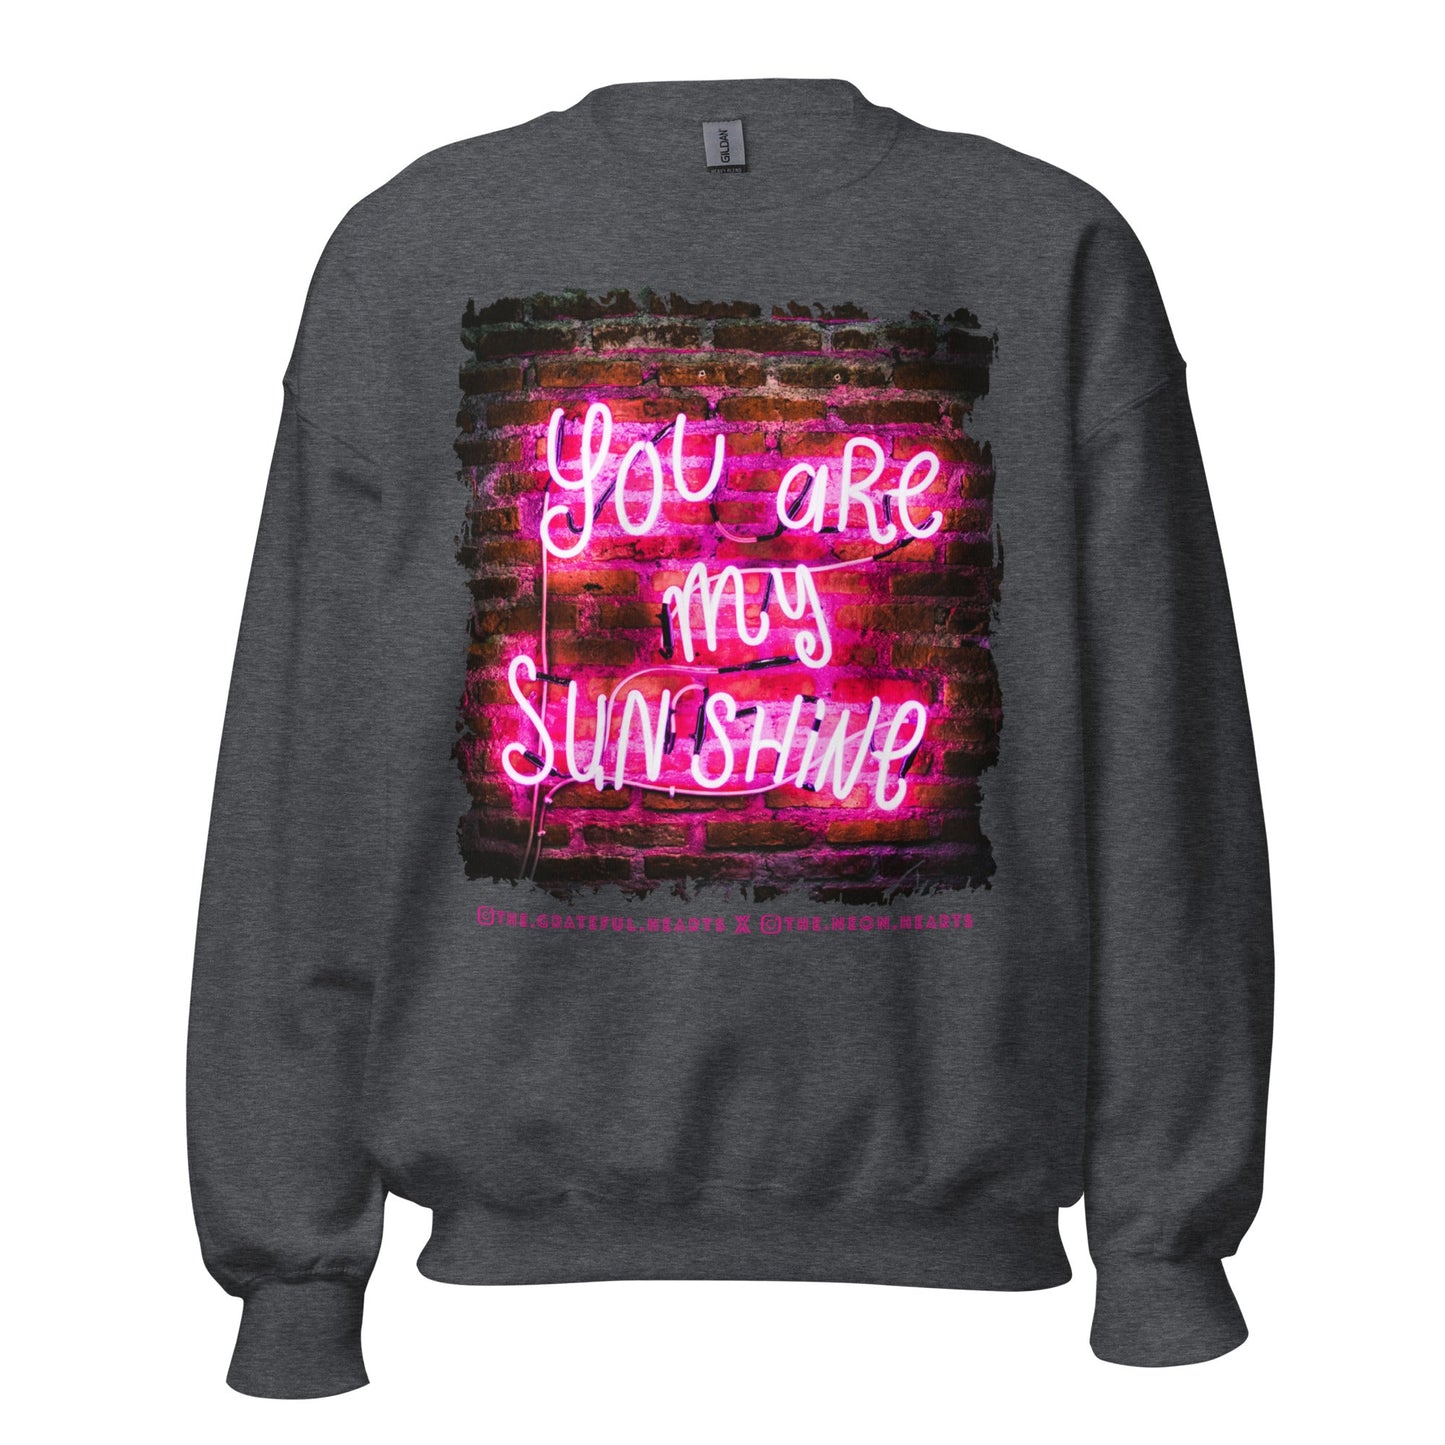 You Are My Sunshine ❤️ - Unisex Sweatshirt (Available in Various Colors 💖💙💜) - The Grateful Hearts